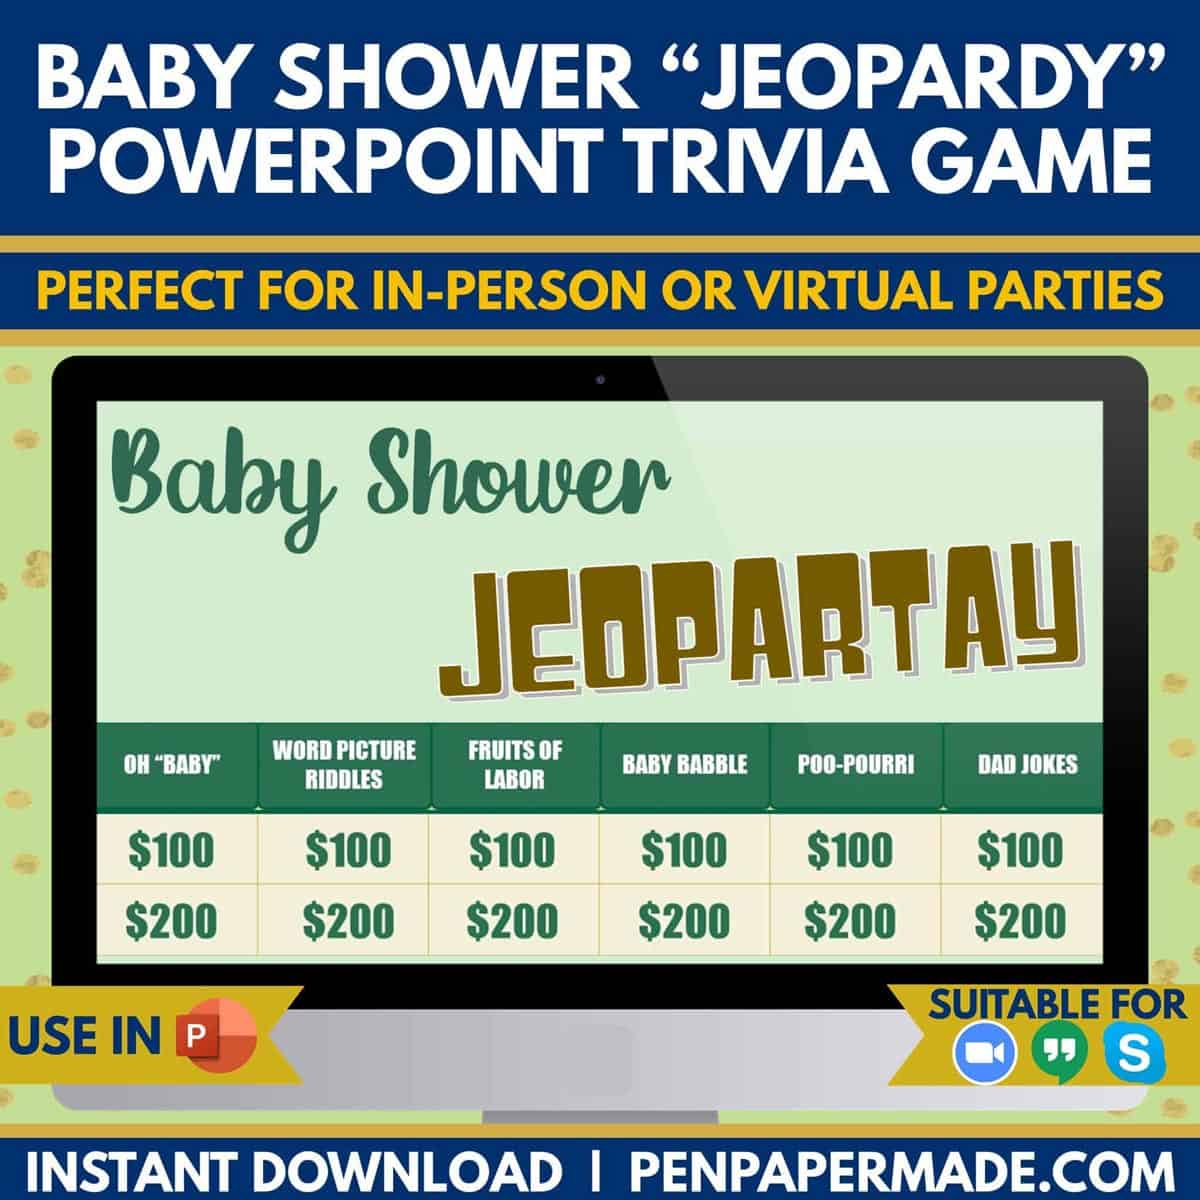 green baby shower jeopardy powerpoint title and game categories.